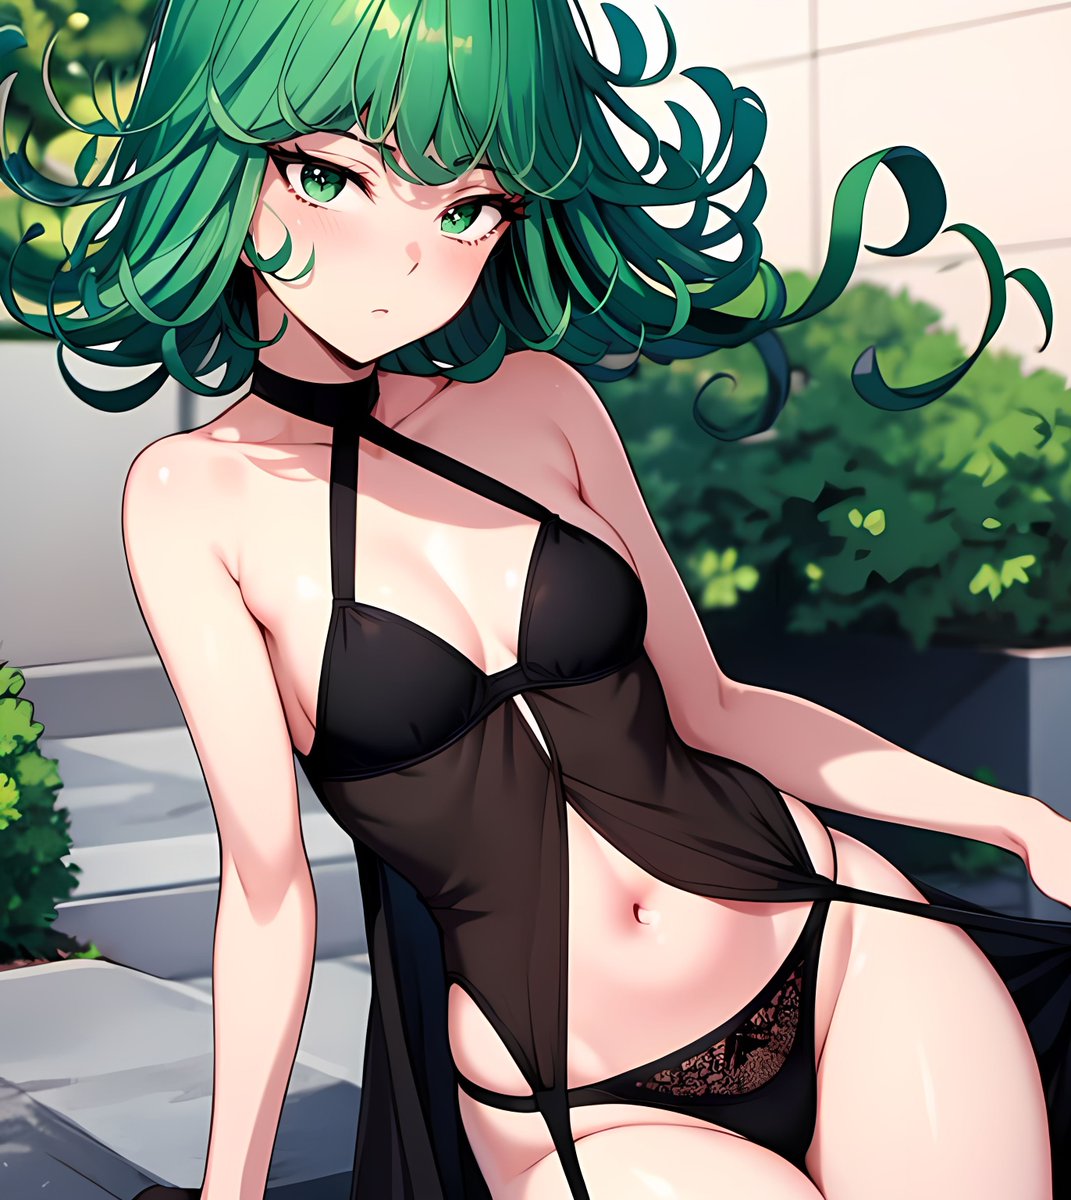 Tatsumaki, you can't go in public with those! 🥹💘